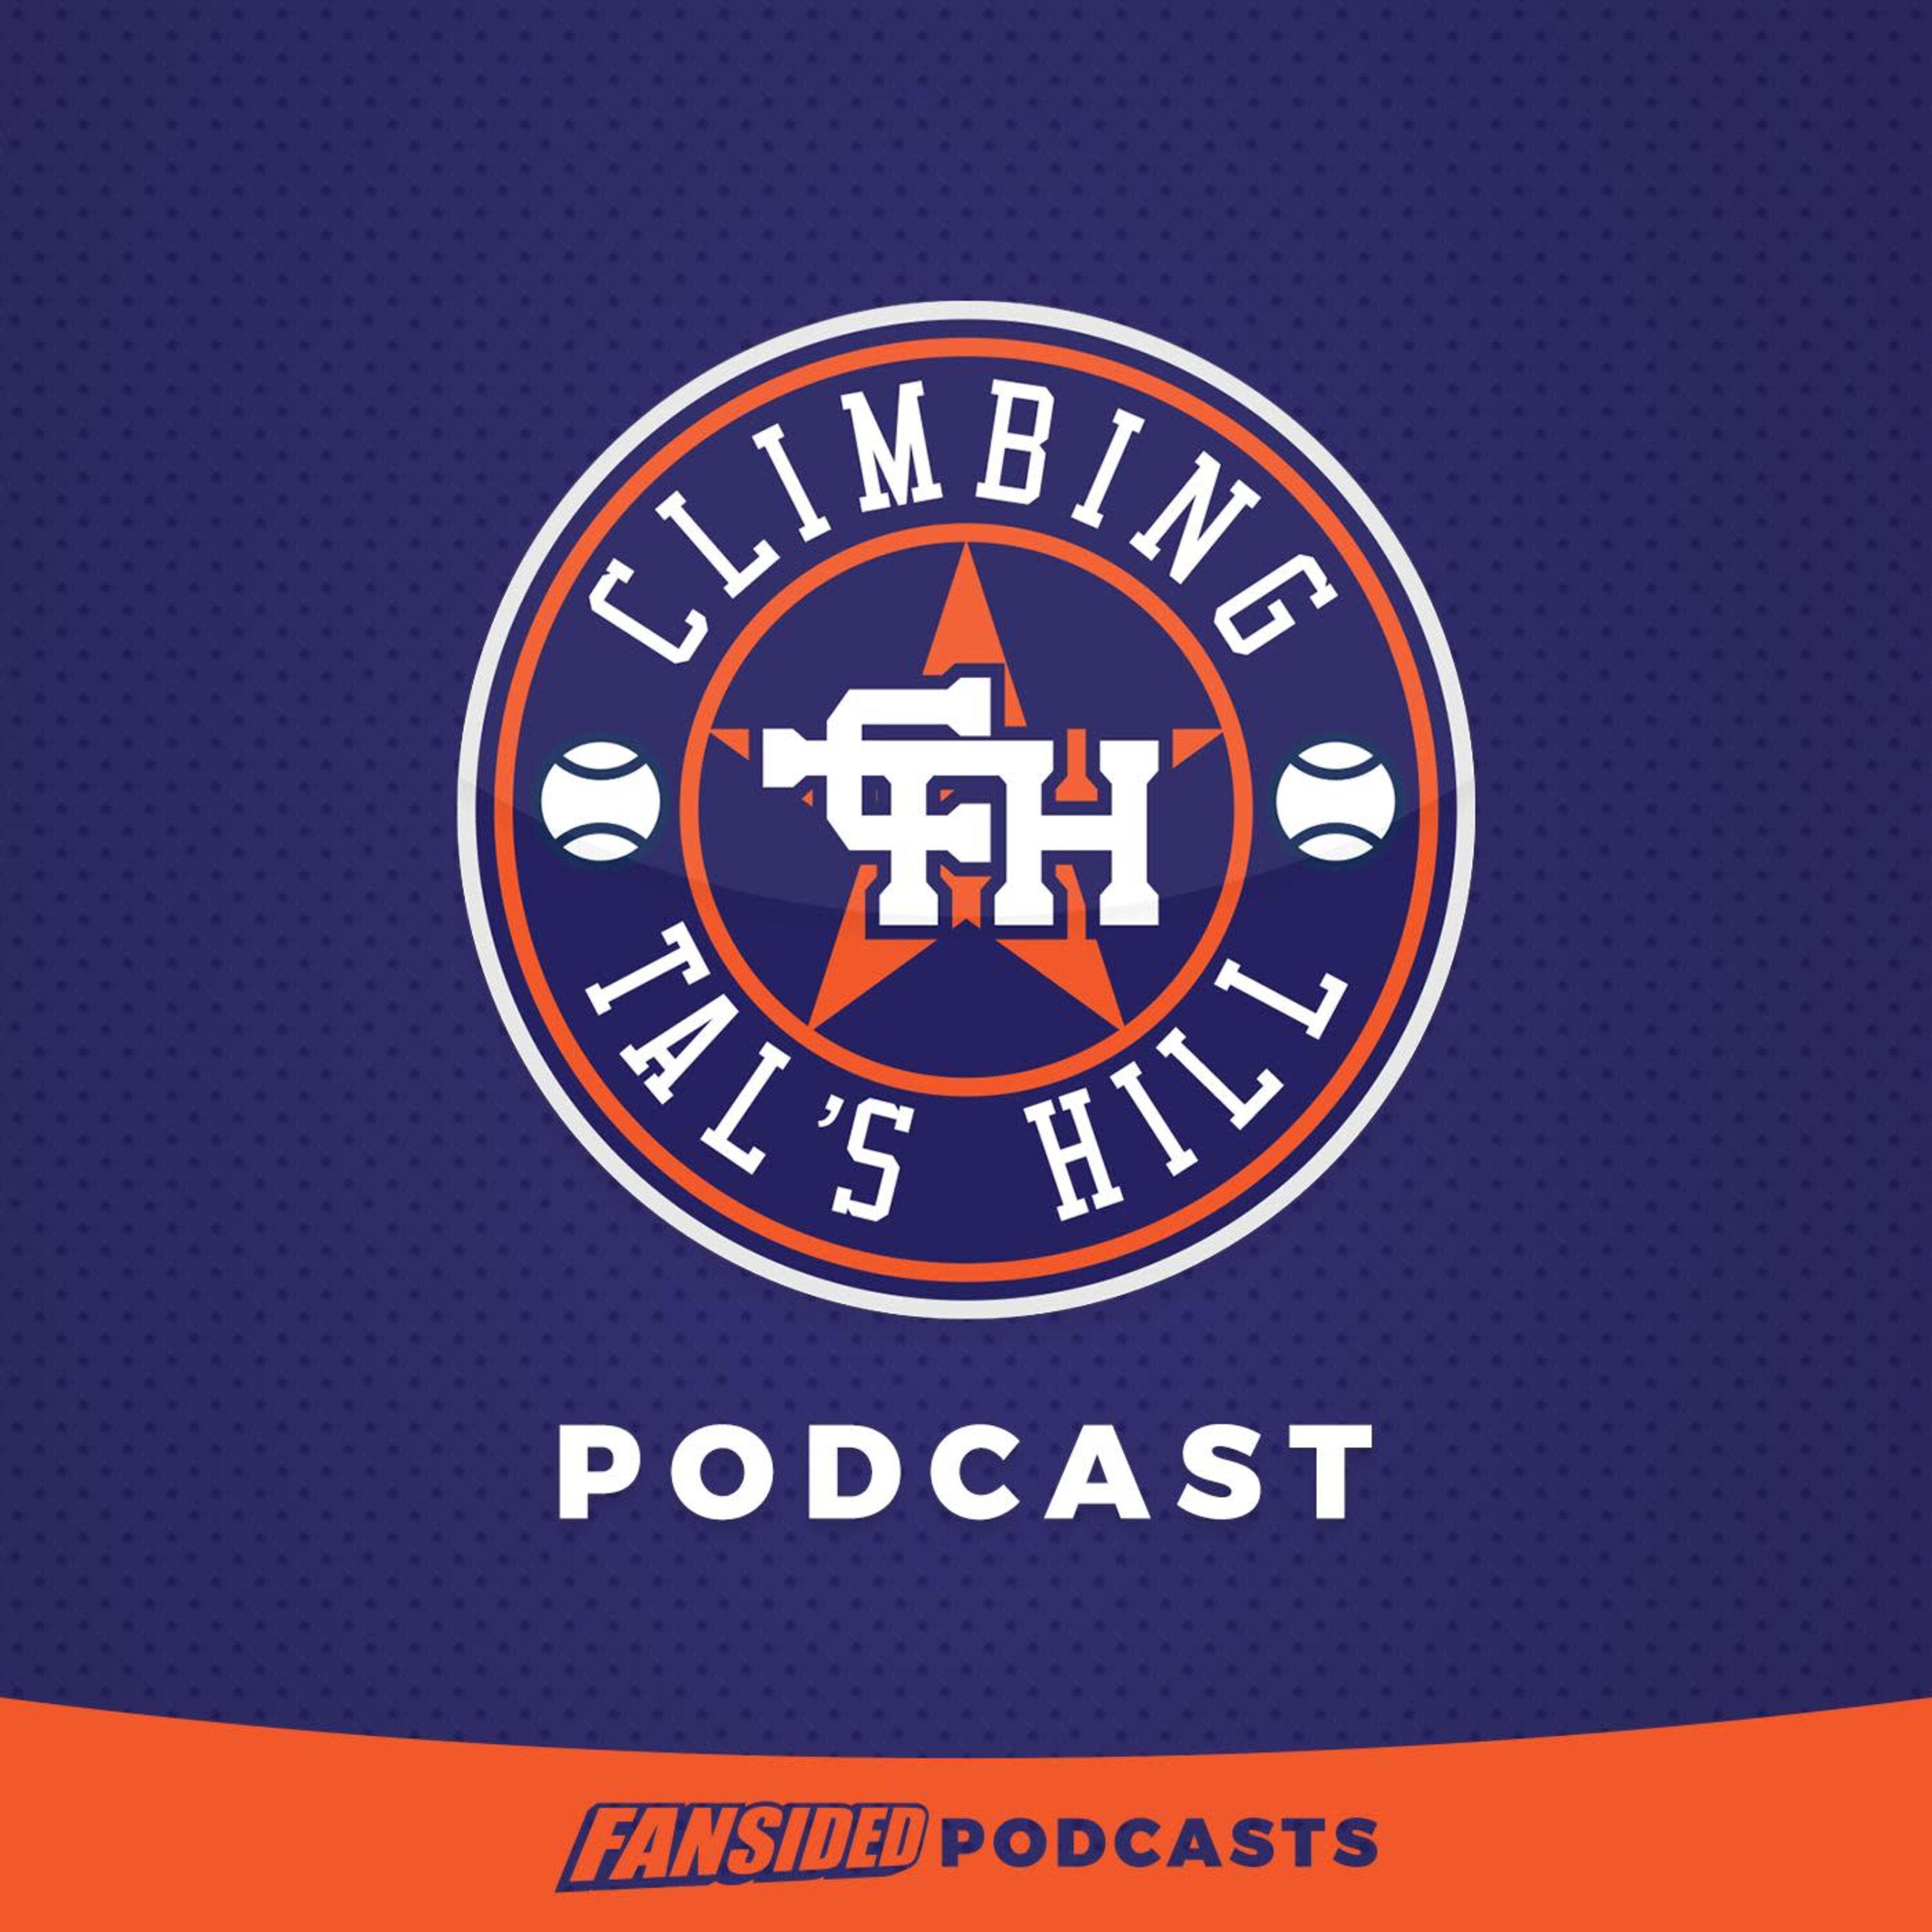 Climbing Tal's Hill Podcast on the Houston Astros